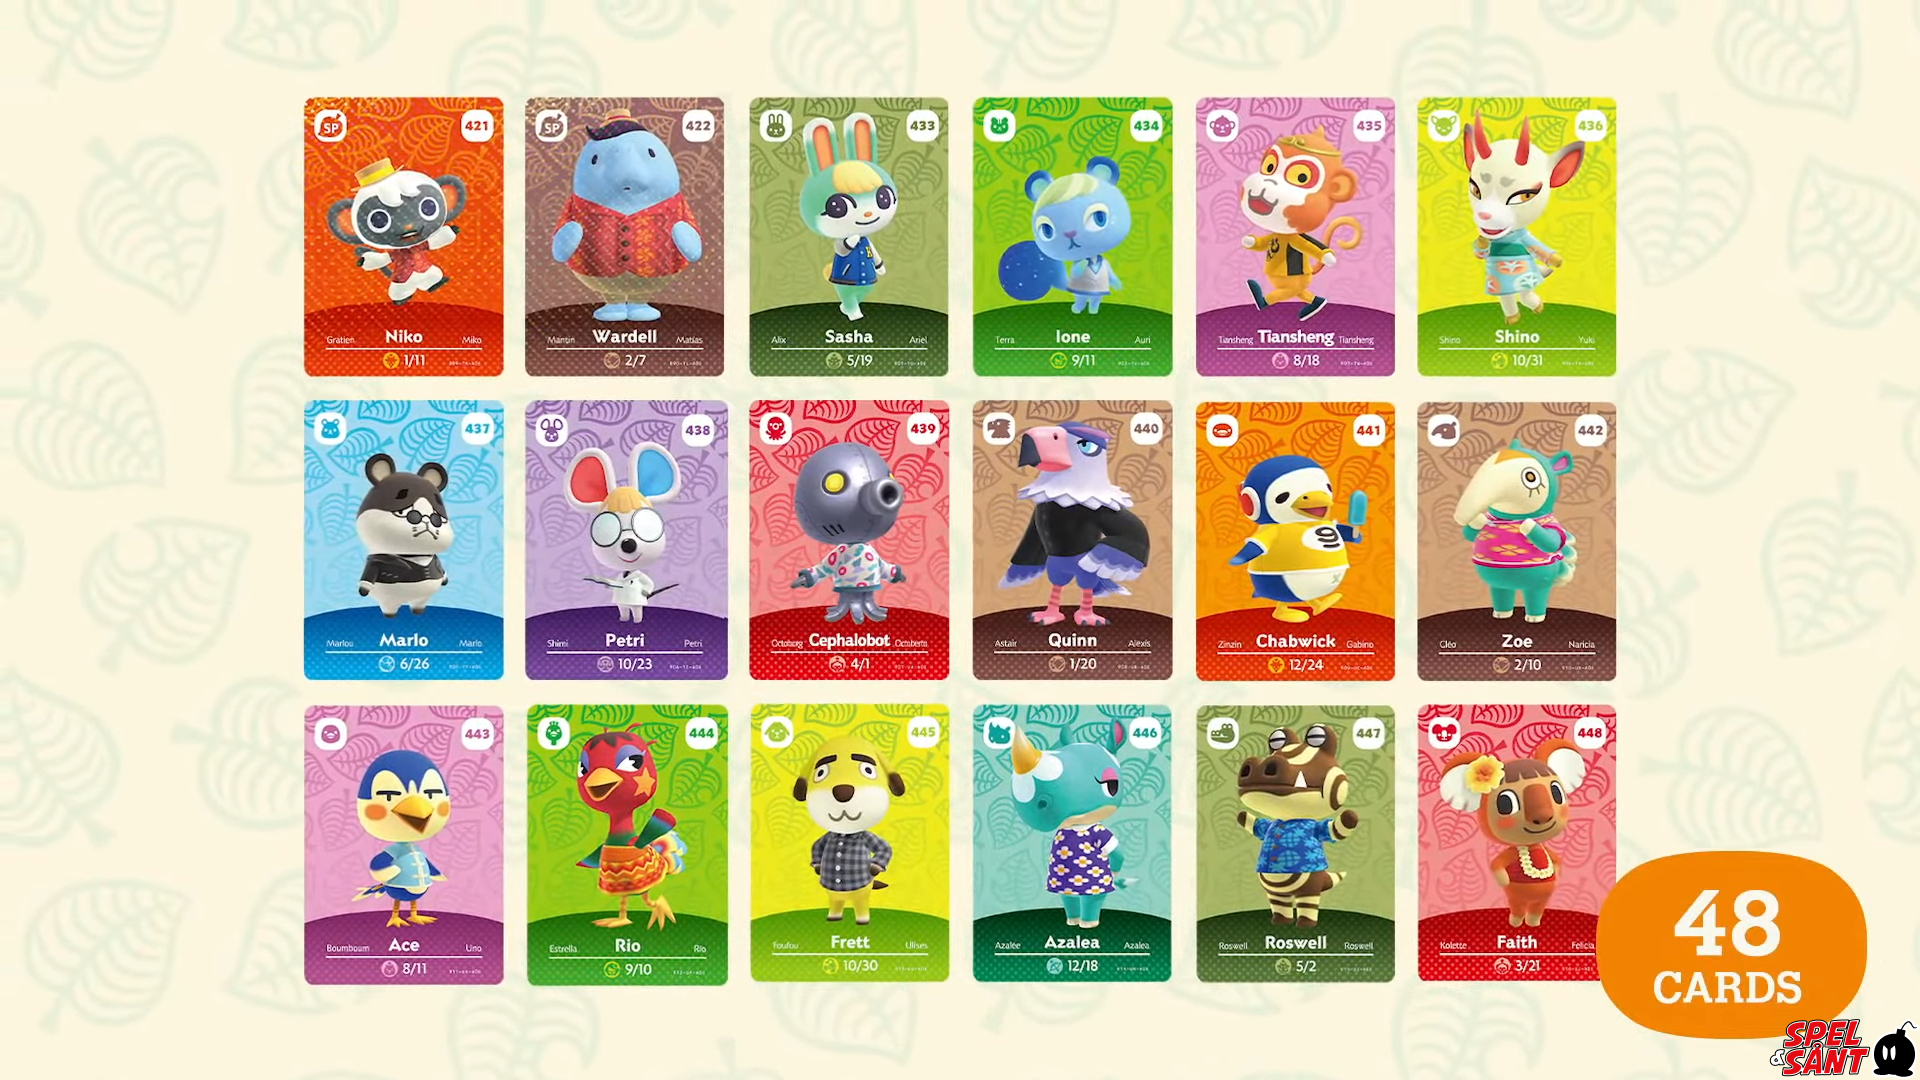 Series 5 Animal Crossing amiibo cards Pack (3st Kort) - Spel & Sånt: The game store with the happiest customers